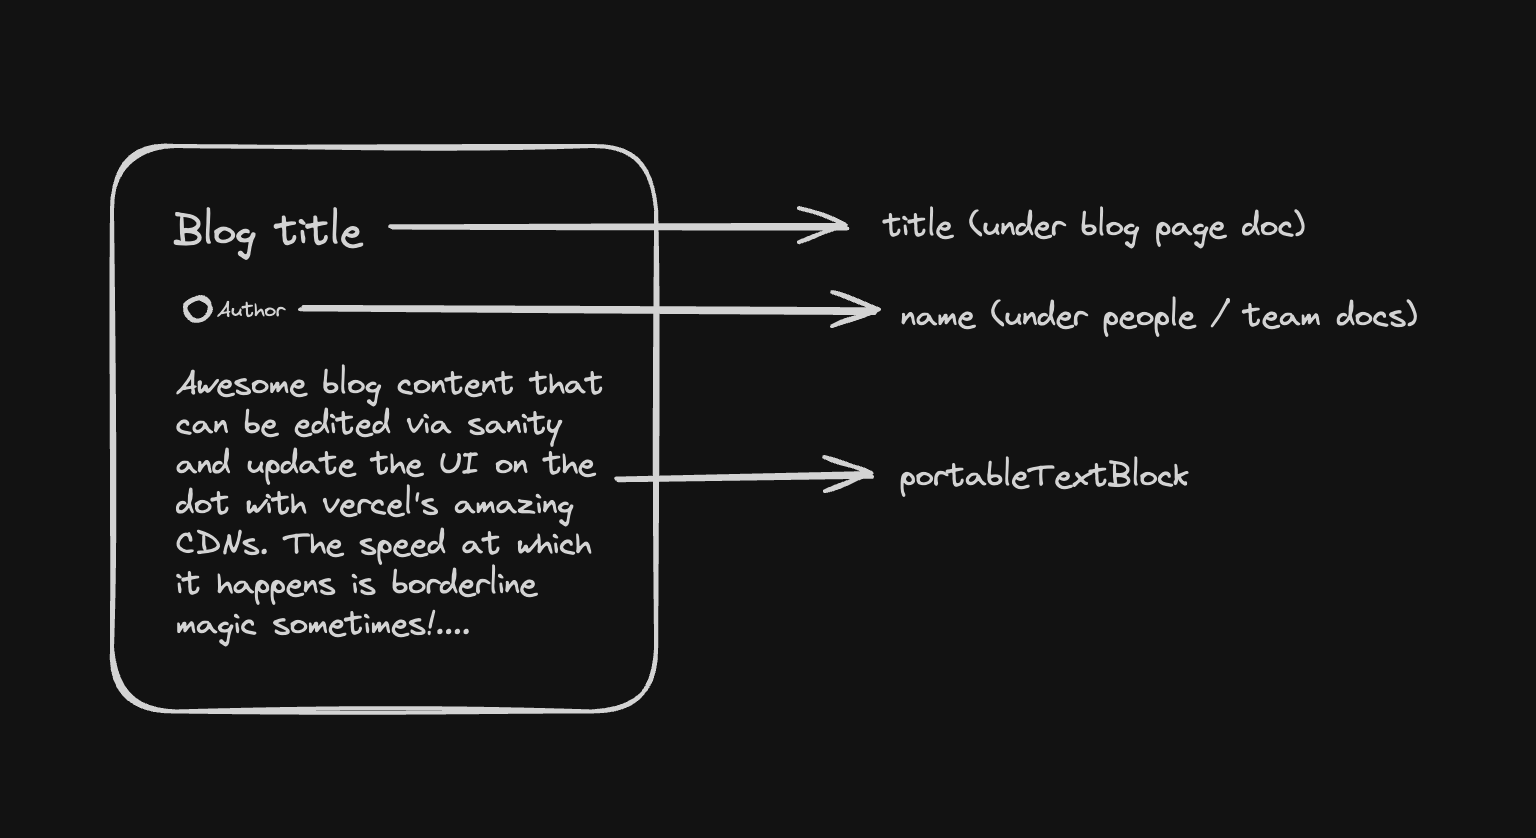 A simple blog structure explained in diagrams